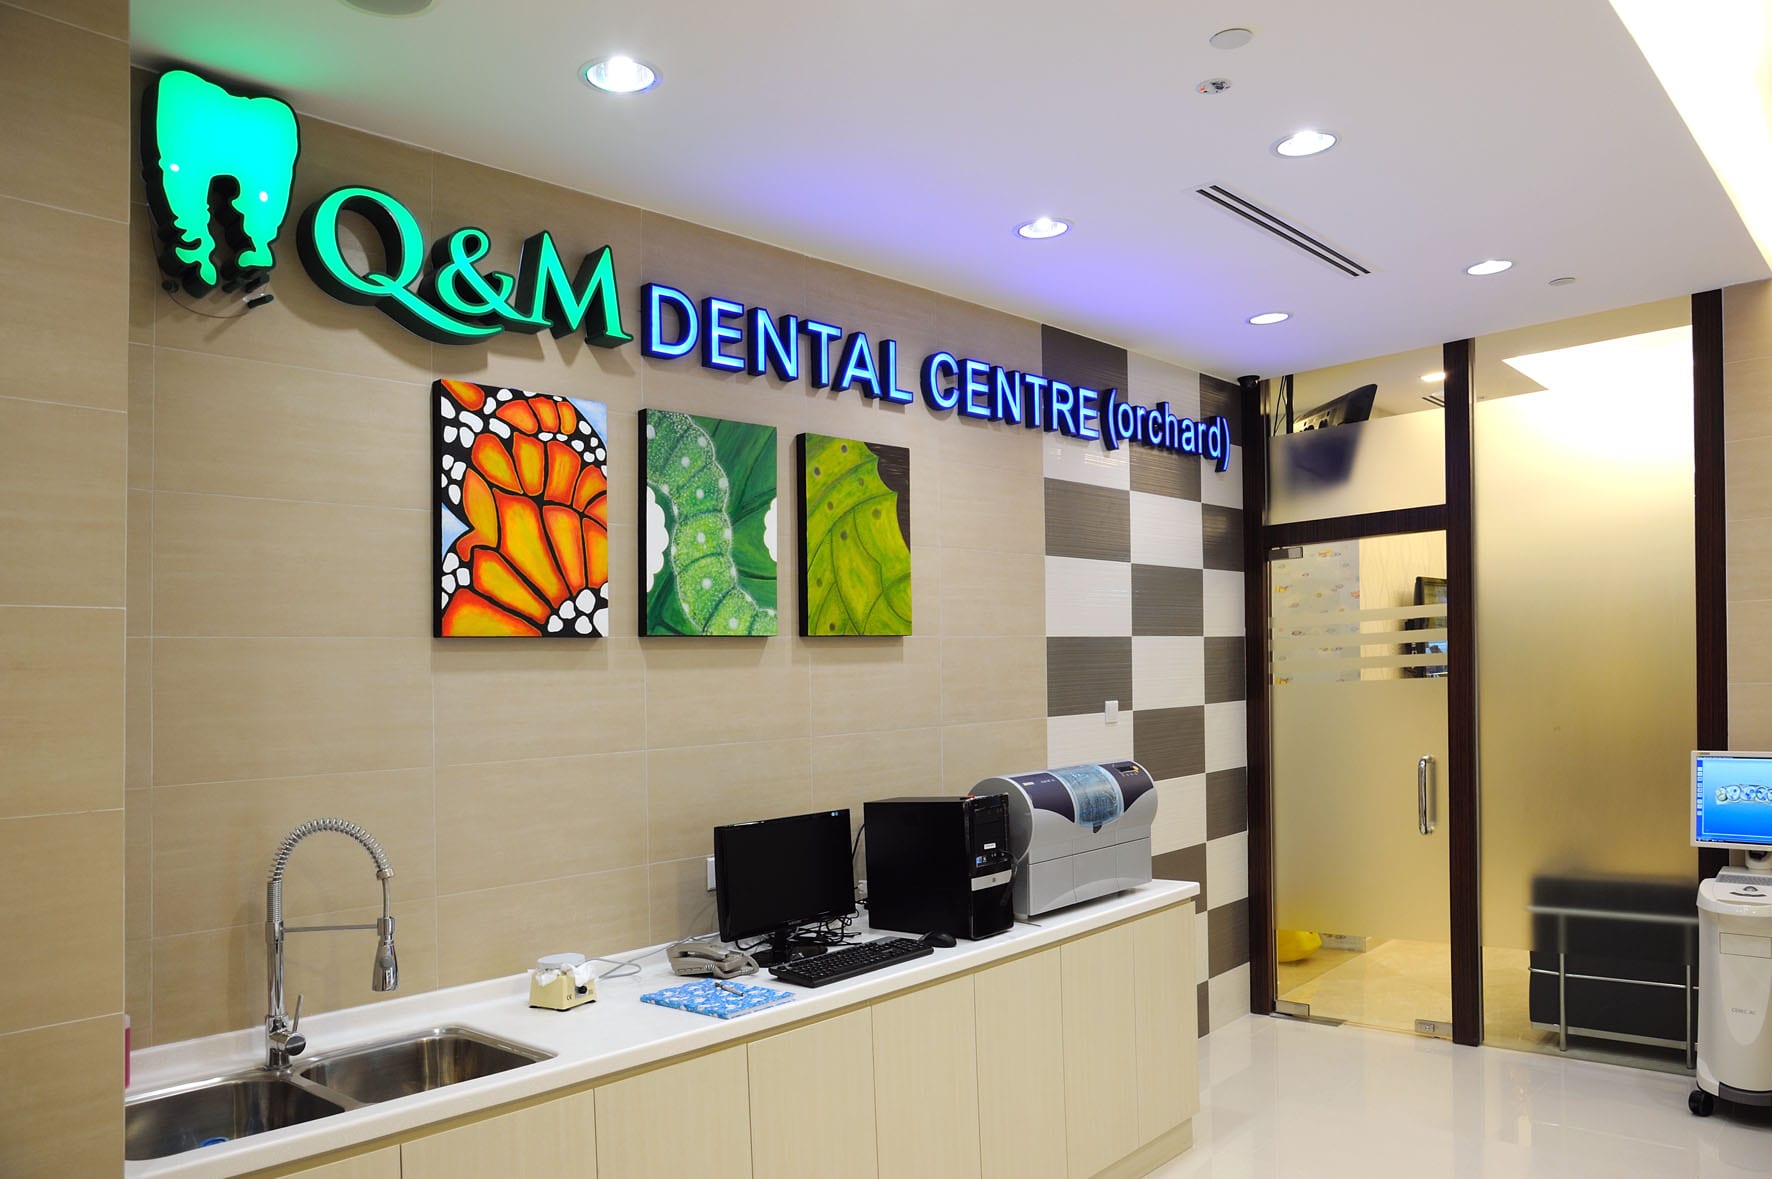 iFAST: Q&M Dental Group is still a buy after its record breaking third quarter